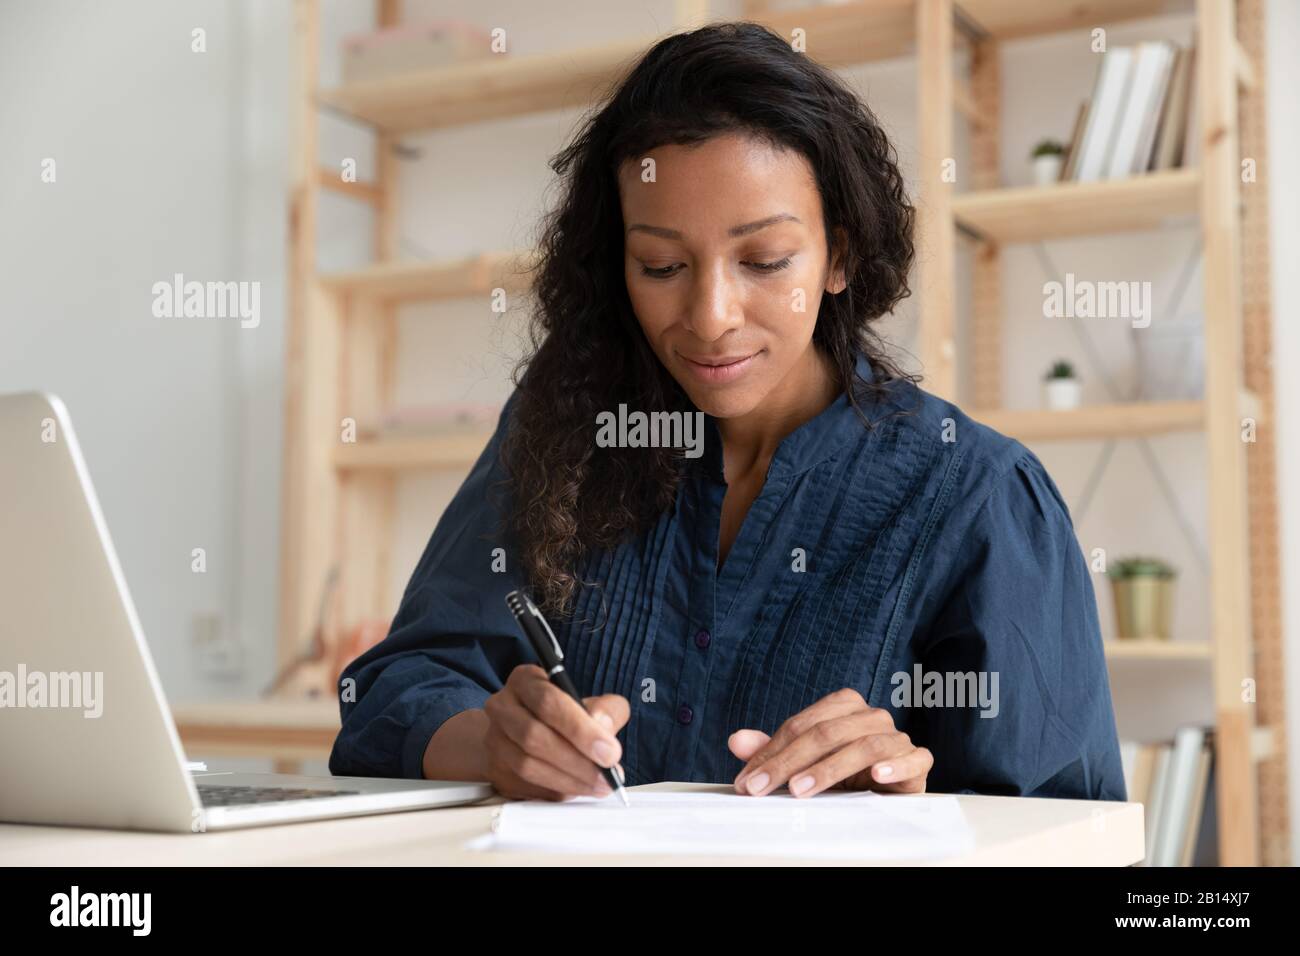 Concentrated professional writing notes while watching webinar. Stock Photo